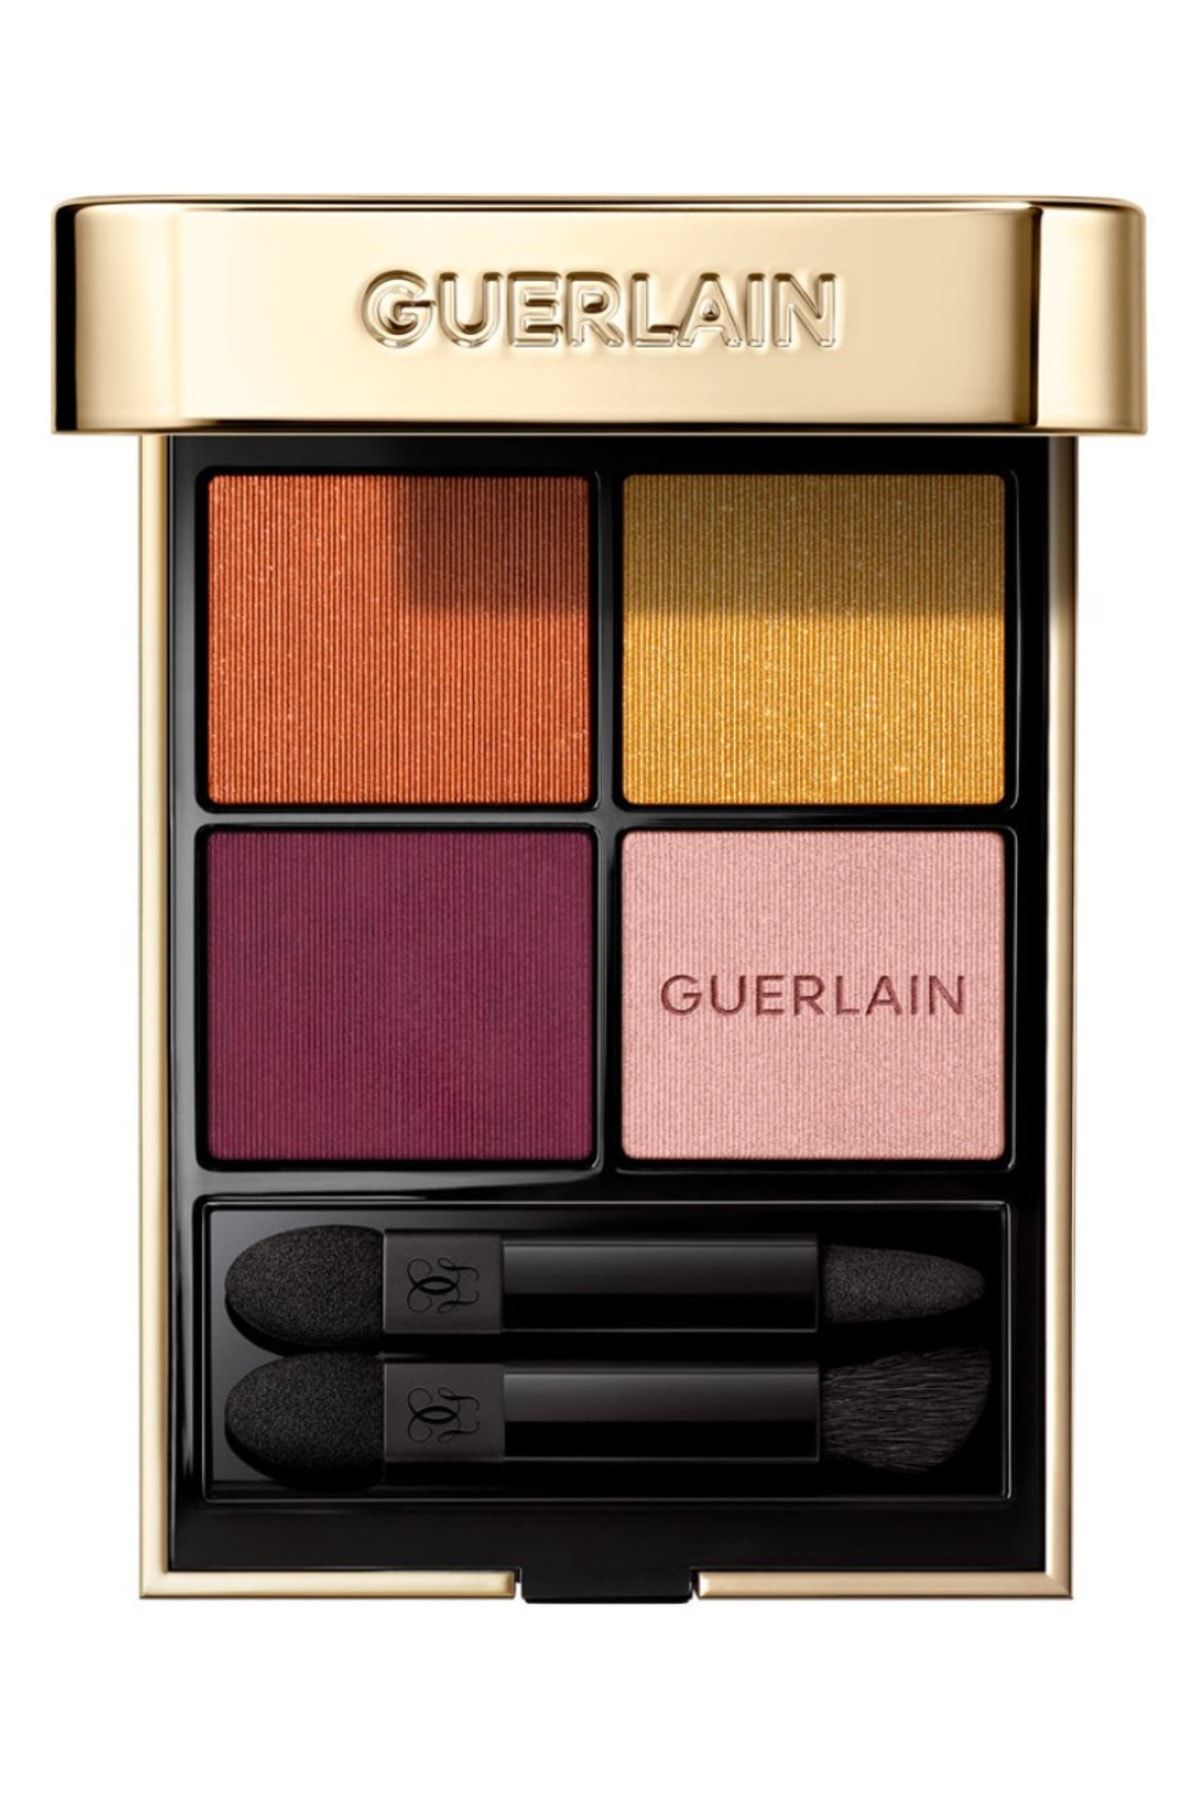 Guerlain Ombres G Eyeshadow Quad Palette Limited Edition